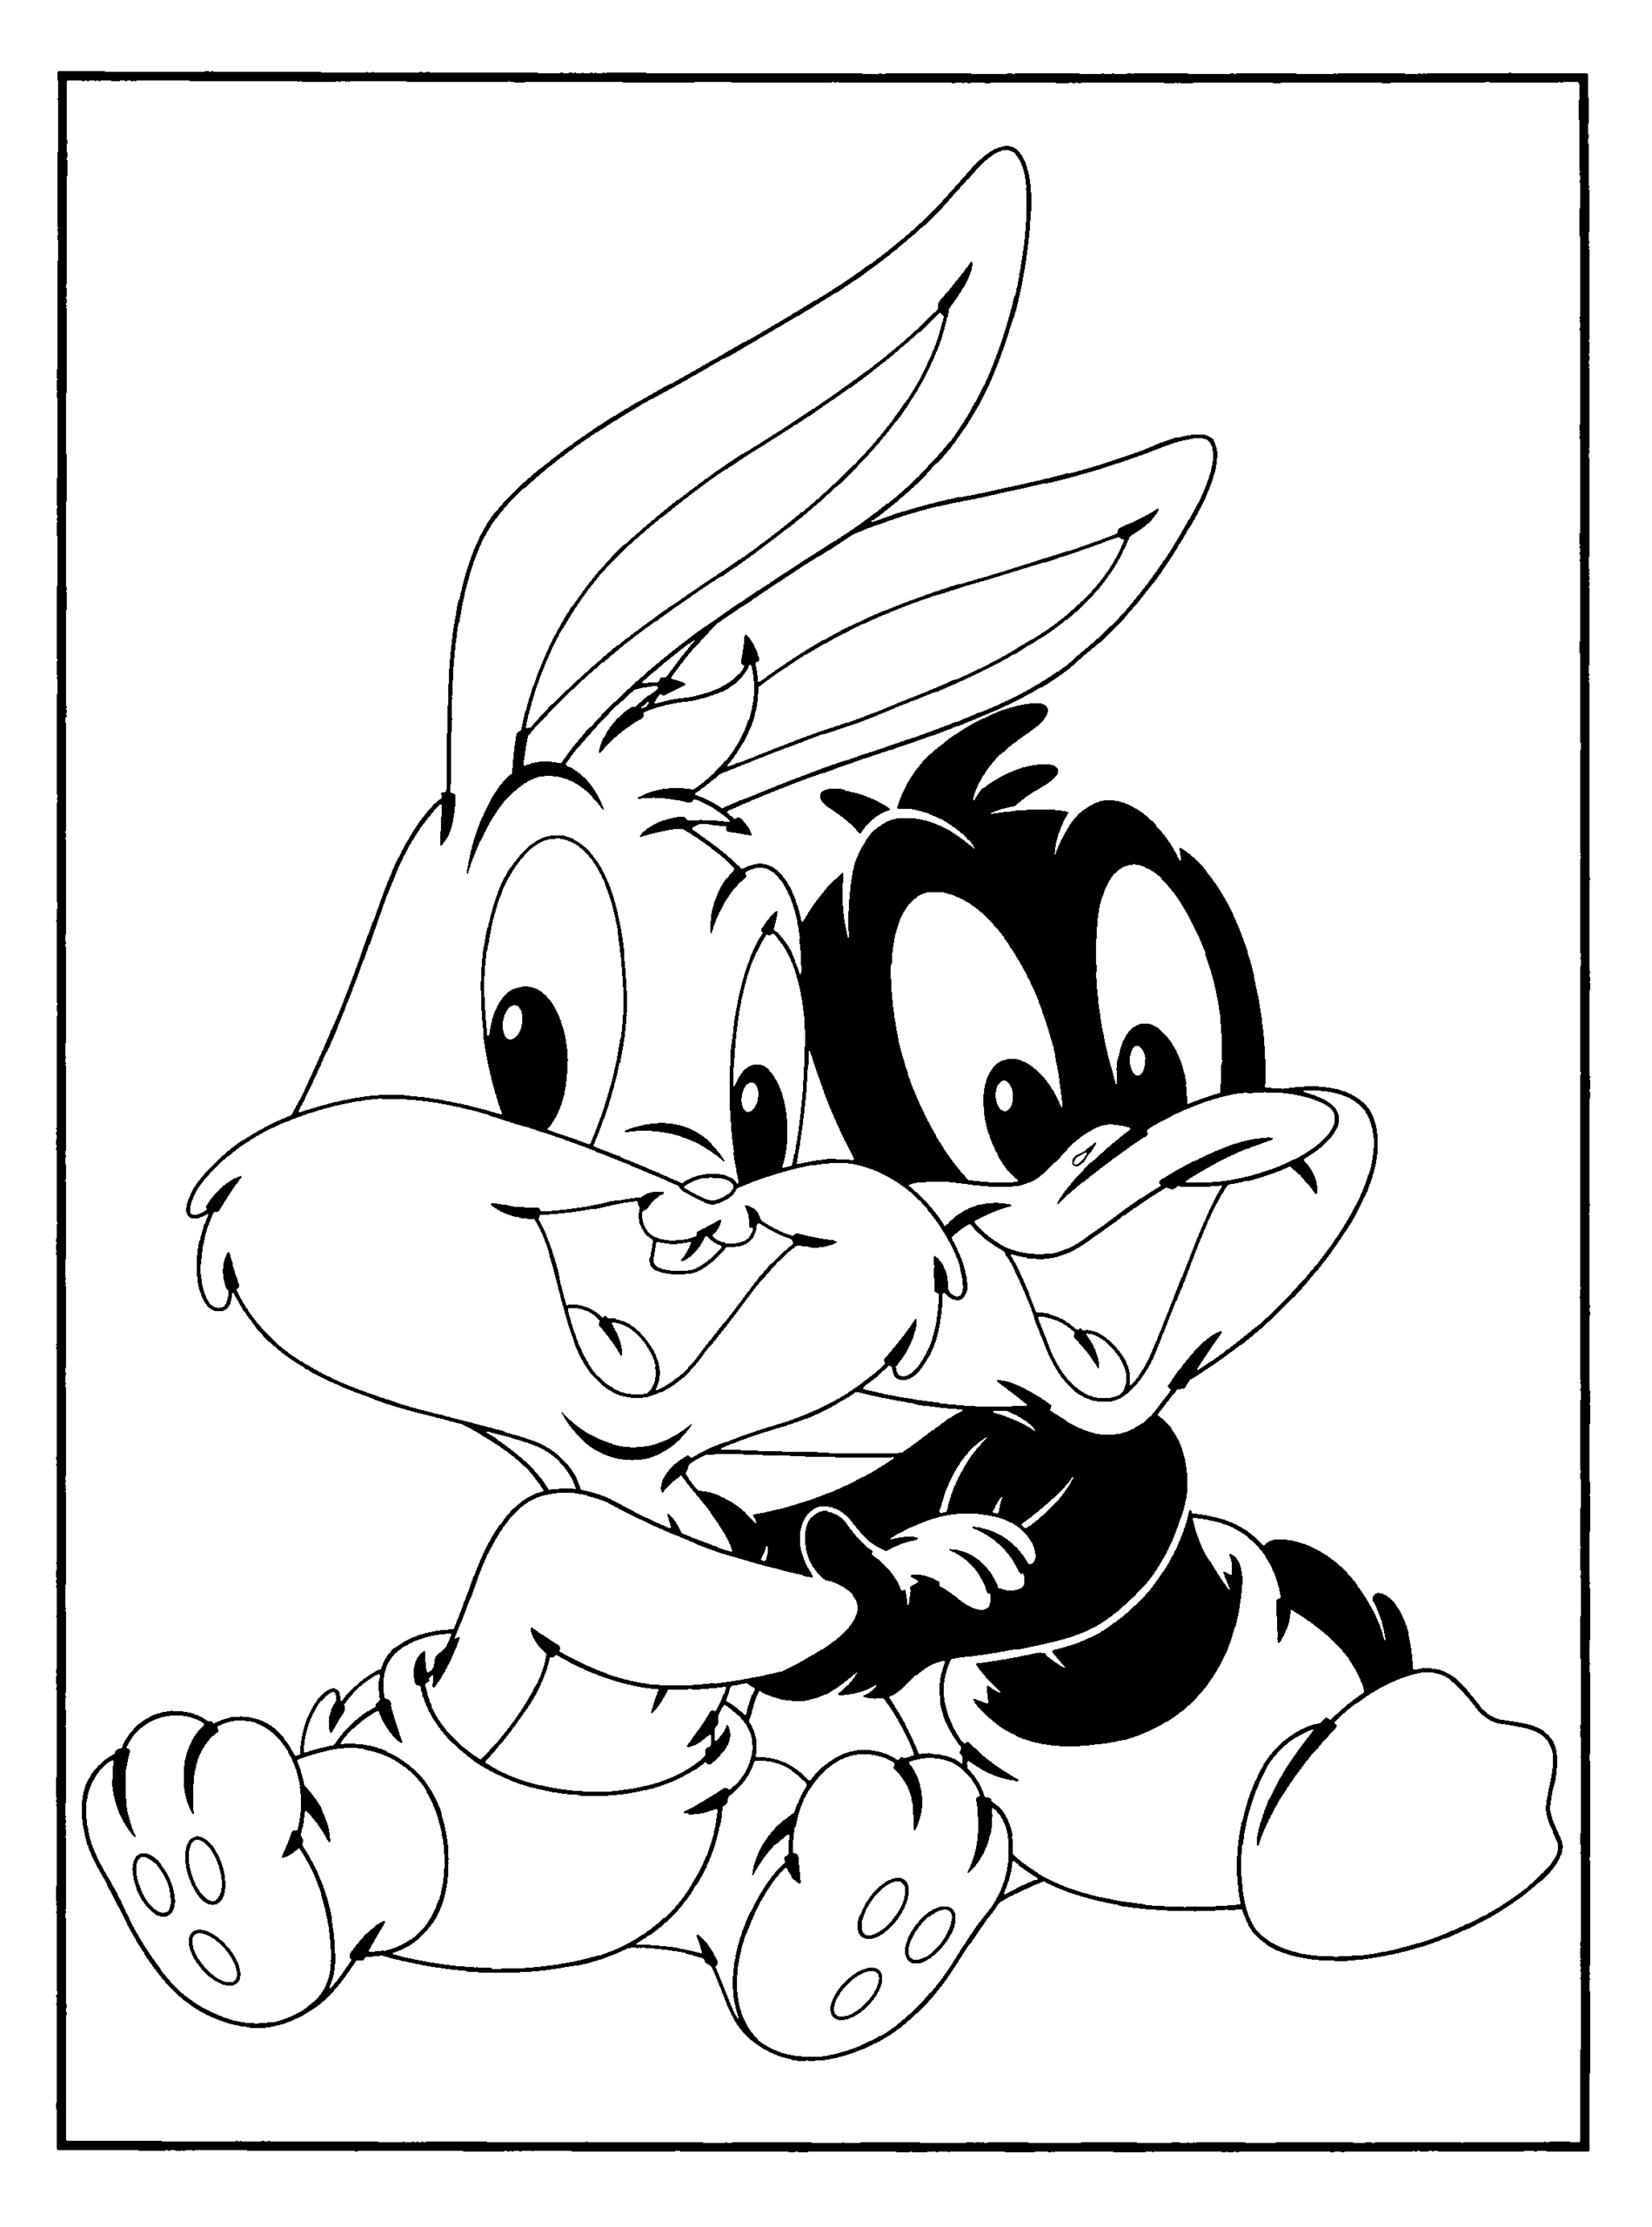 Looney Tunes Coloring Pages TV Film looney tunes 24 Printable 2020 04591 Coloring4free